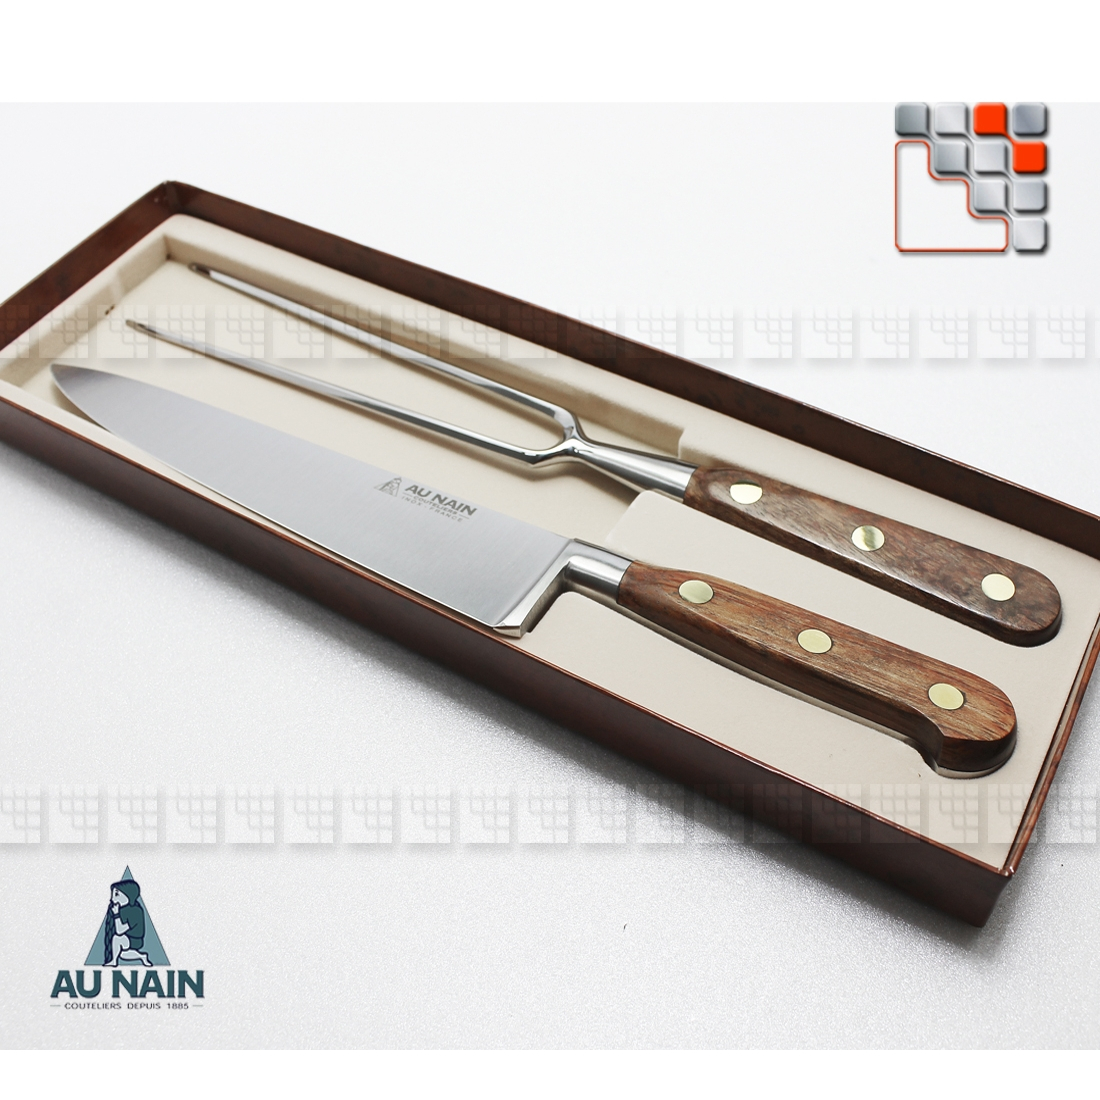 Cutlery Service Prince Gastronome Rosewood AUNAIN A38-1992001 AU NAIN® Coutellerie & Cutting